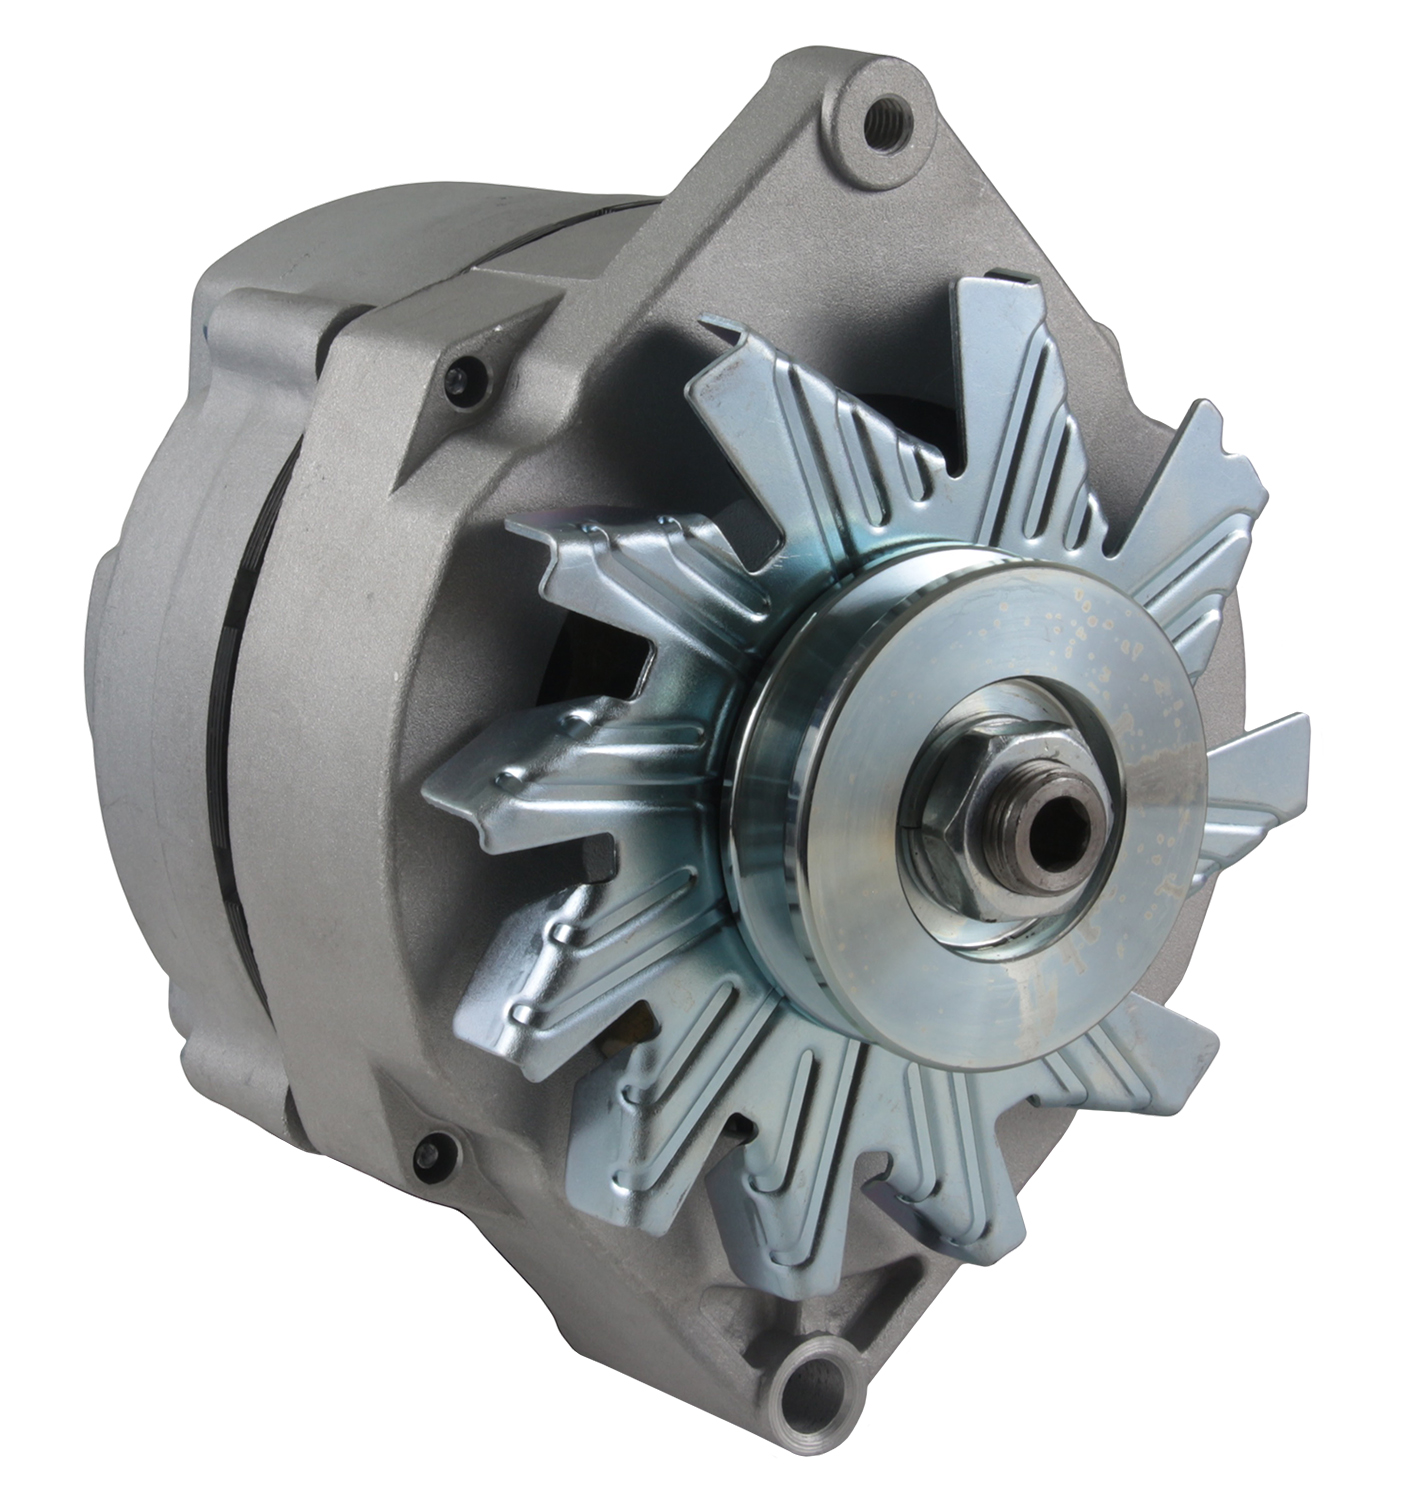 Rareelectrical NEW ALTERNATOR COMPATIBLE WITH COCKSHUTT TRACOTR 550 552 770 880 1955T 100471 1100771 138576